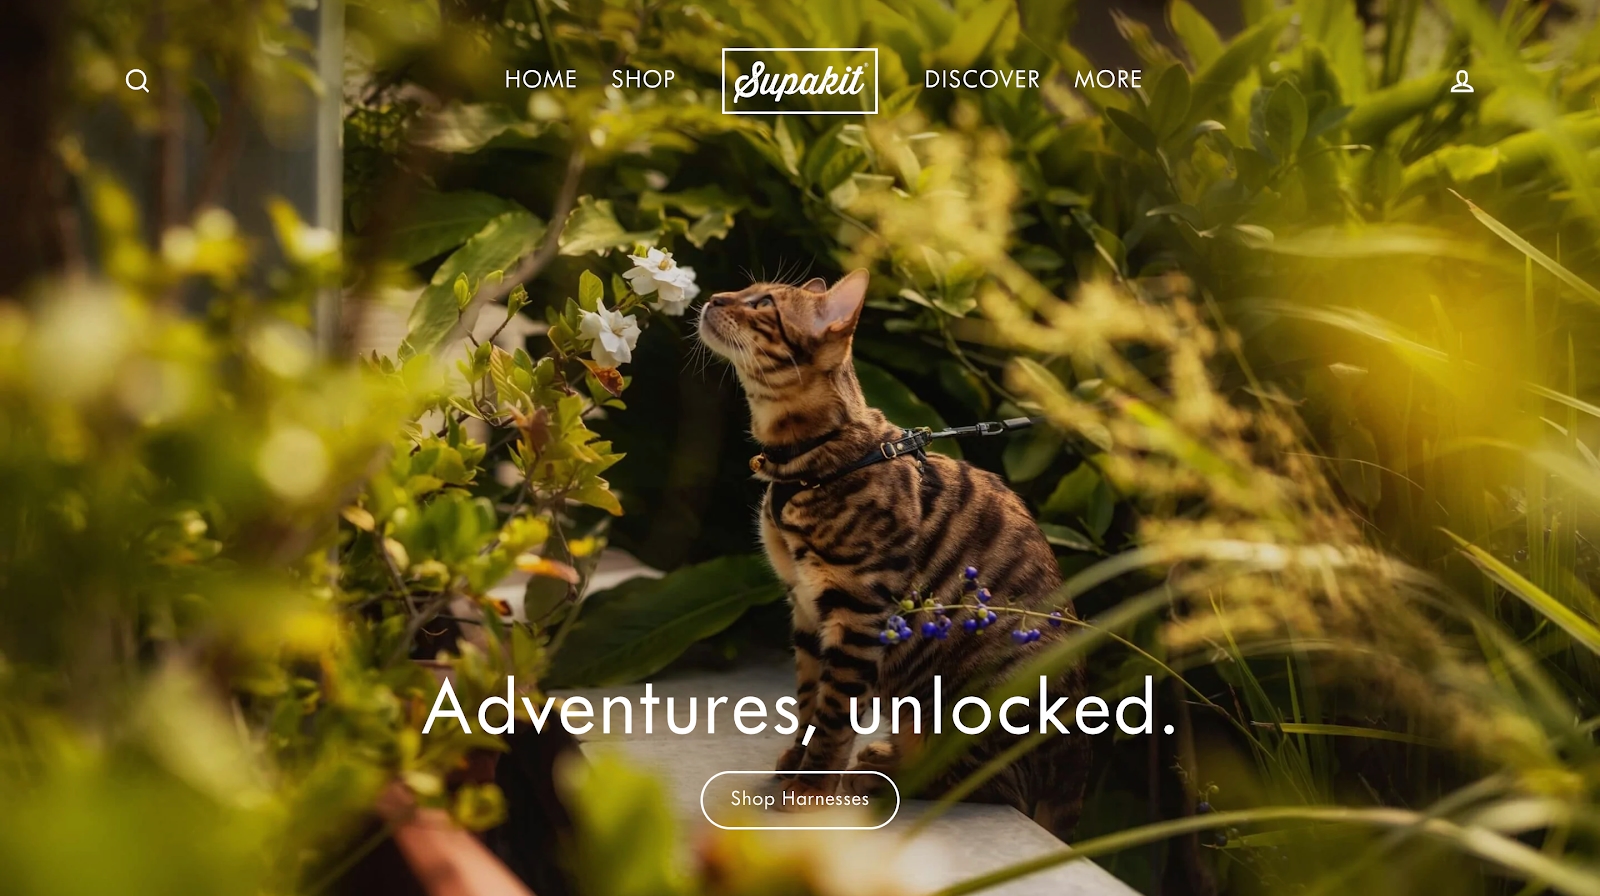 Supakit homepage with a cat on a leash in a garden.